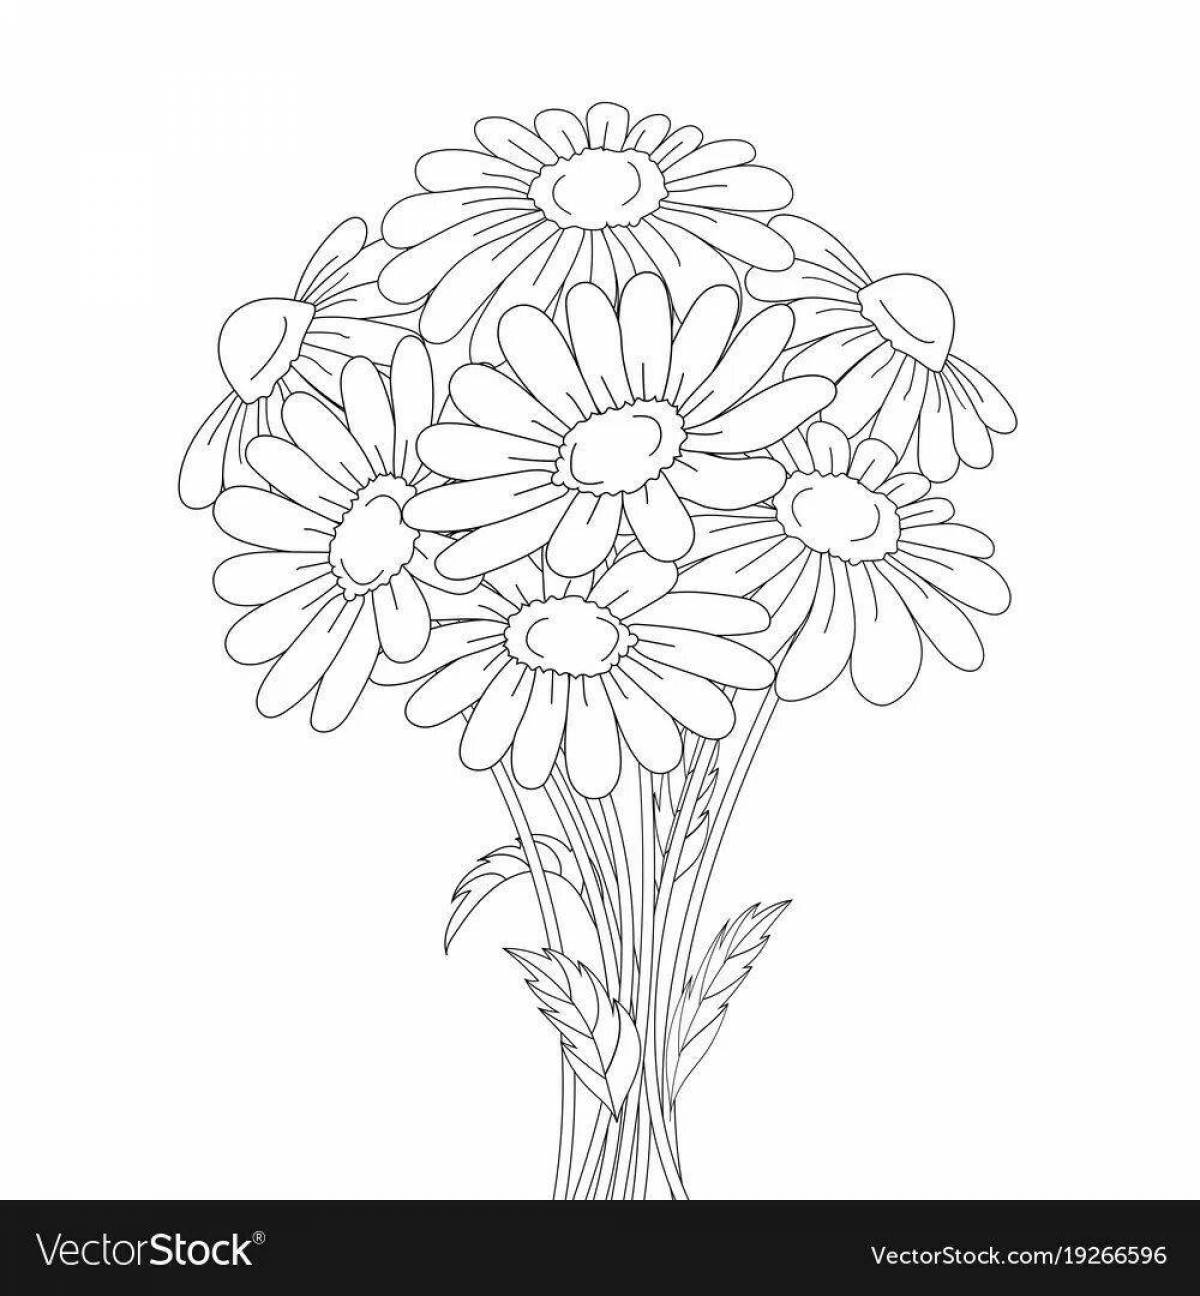 Coloring chic bouquet of daisies